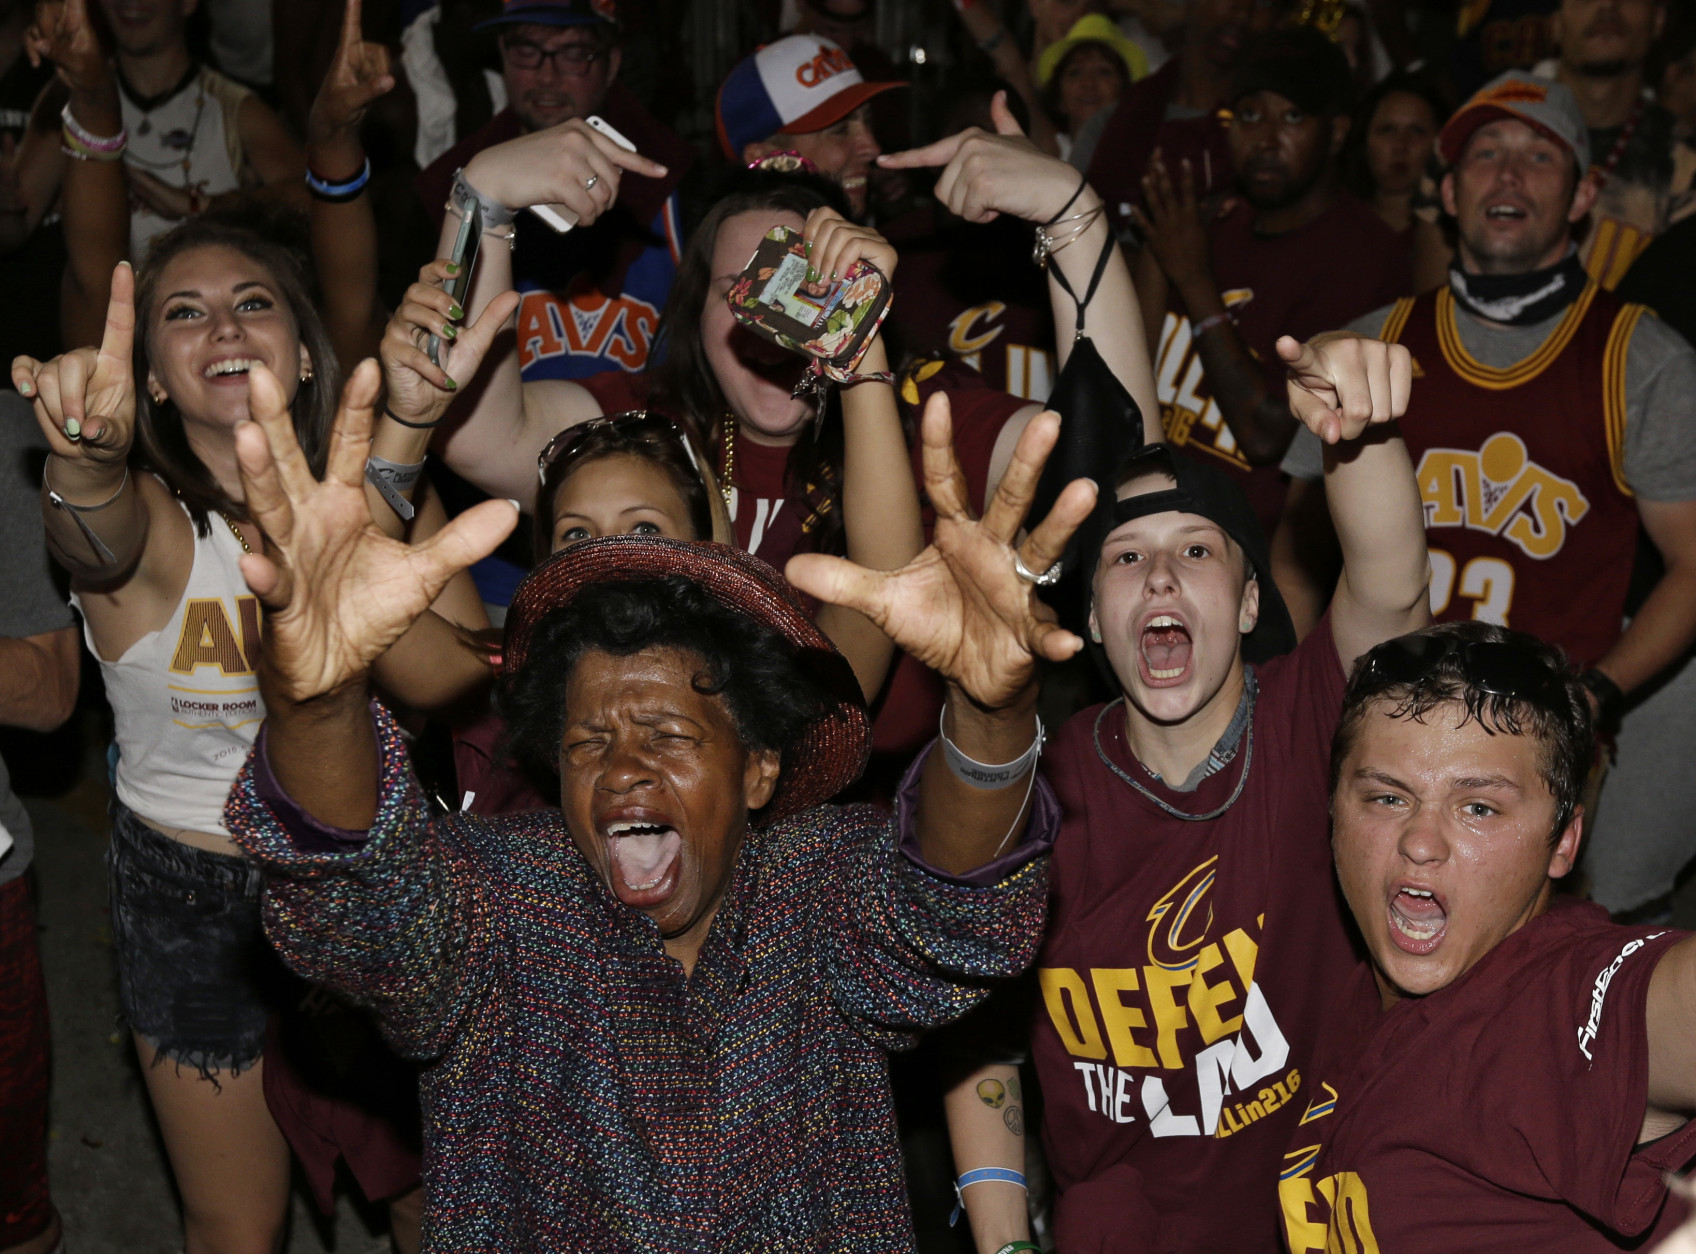 Cleveland Cavaliers fans celebrate after the Cavaliers defeated the Golden State Warriors 93-89 in Game 7 of the NBA basketball Finals, Sunday, June 19, 2016, in Cleveland. (AP Photo/Tony Dejak)